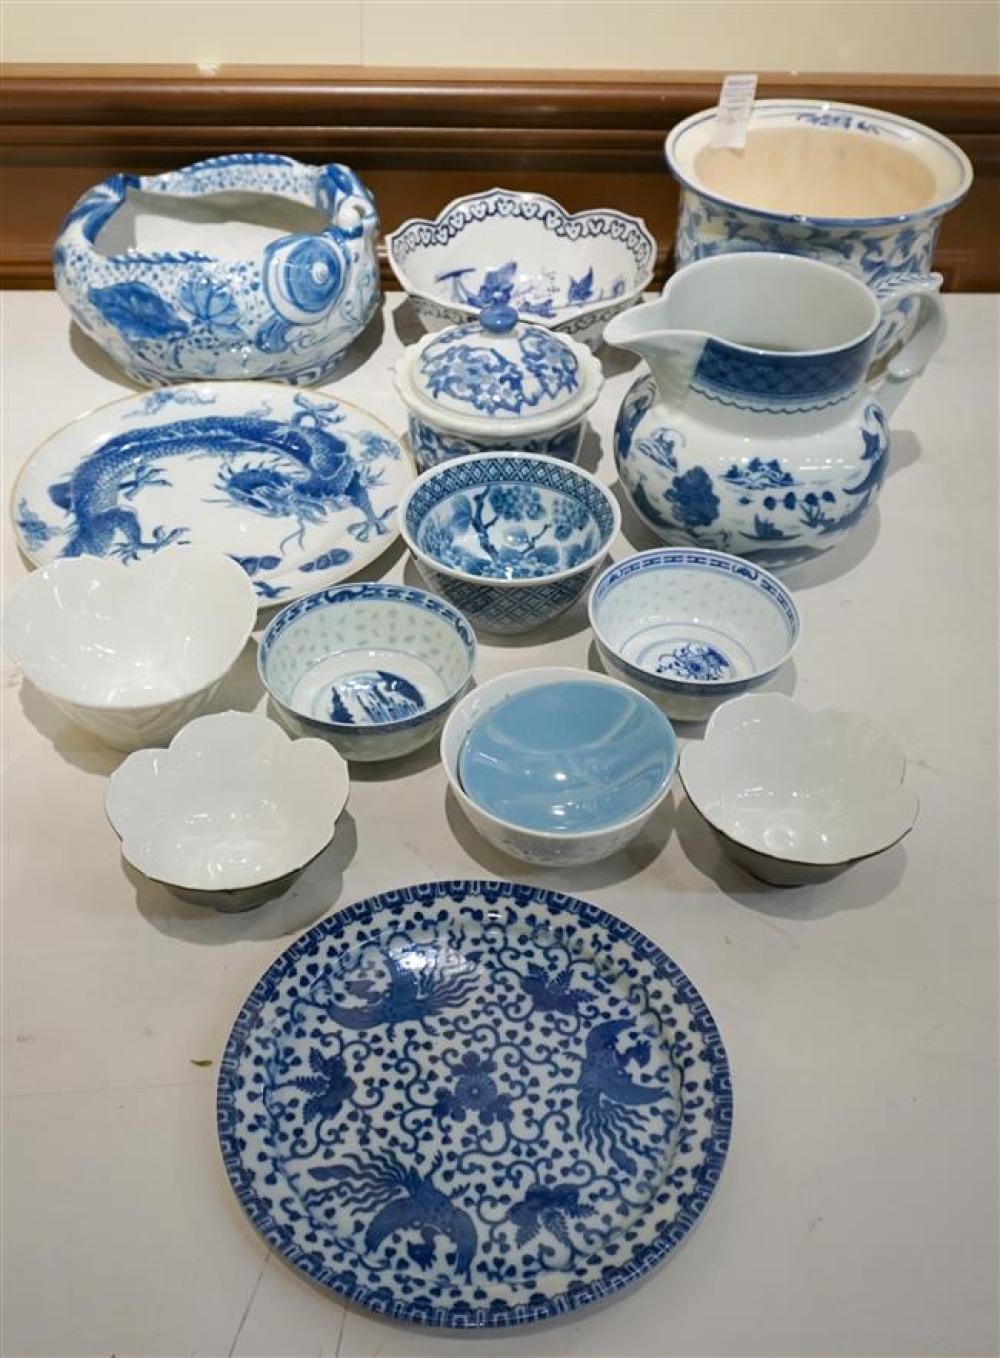 COLLECTION WITH CHINESE PORCELAIN 3258a1